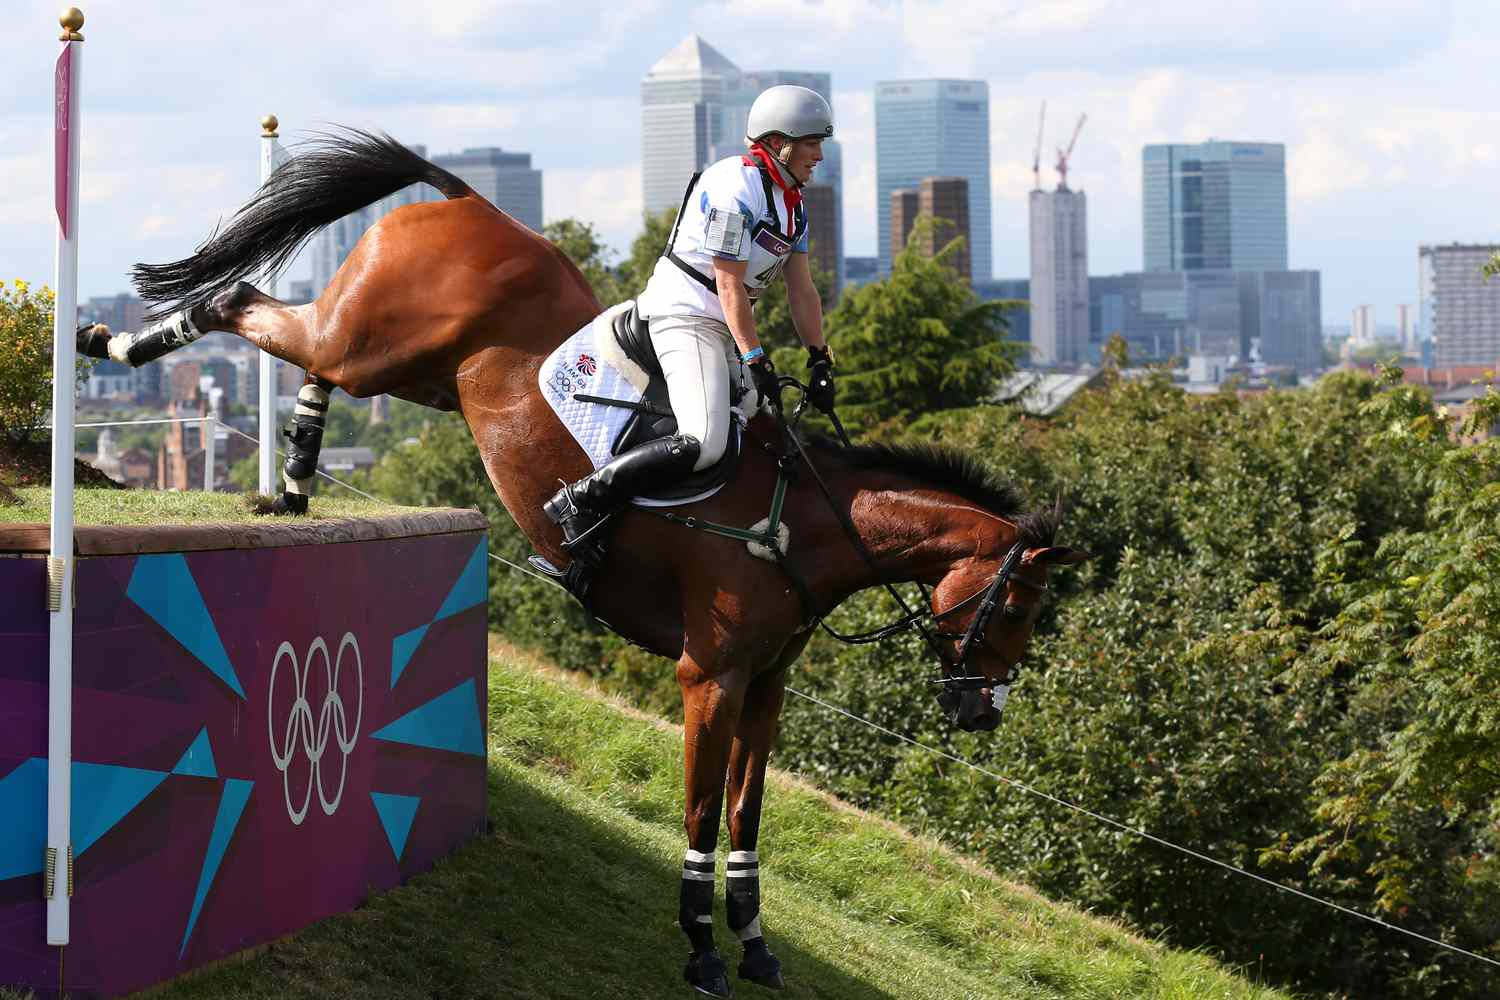 Zara Tindall competing in an equestrian match at the Summer Olympics Wallpaper